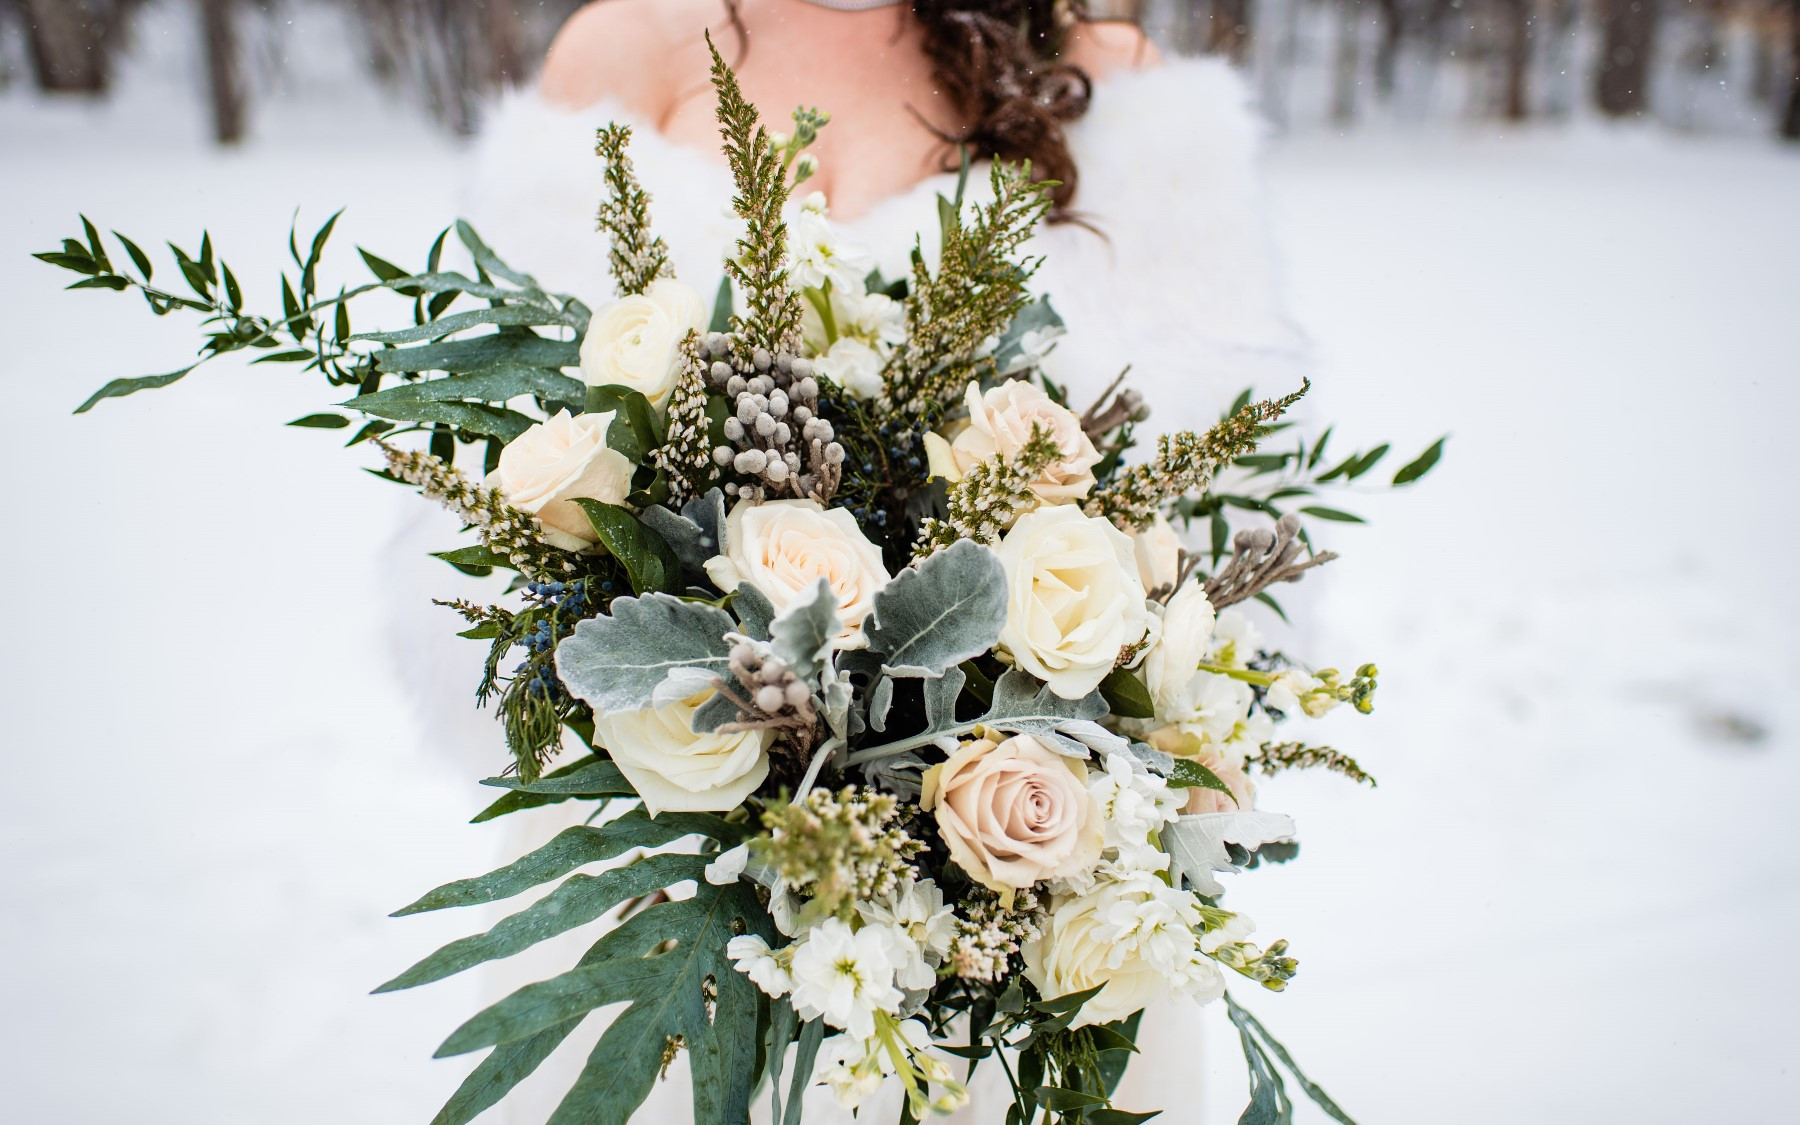 floral bouquet featuring white roses, greenery, and other floral.